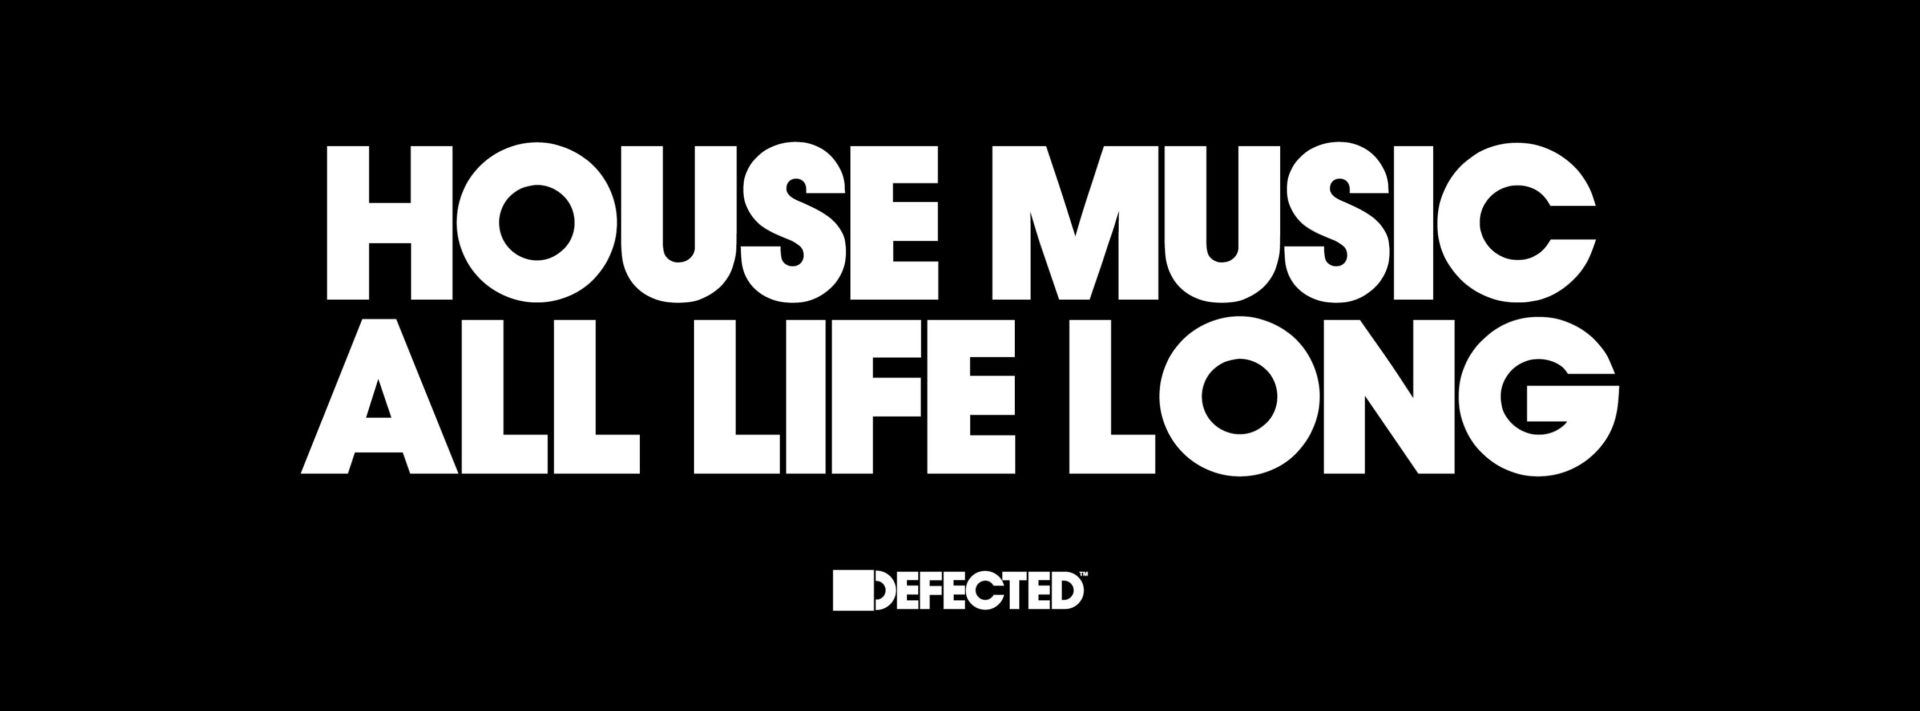 house music all life long